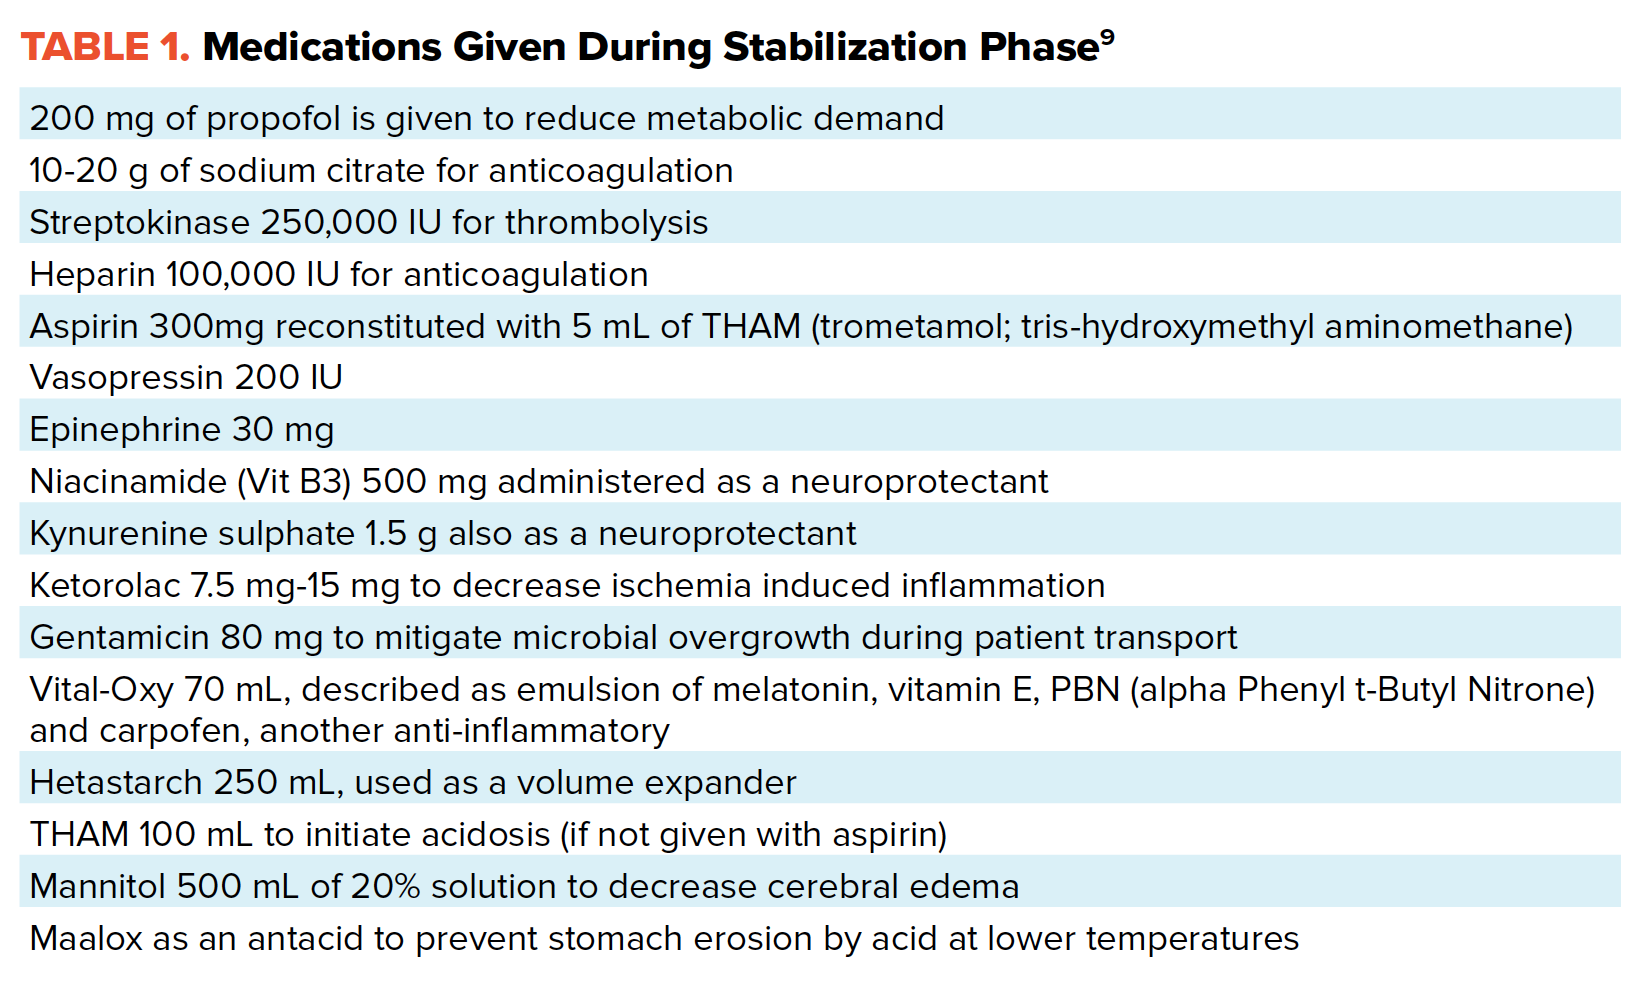 Table 1. Medications Given During Stabilization Phase